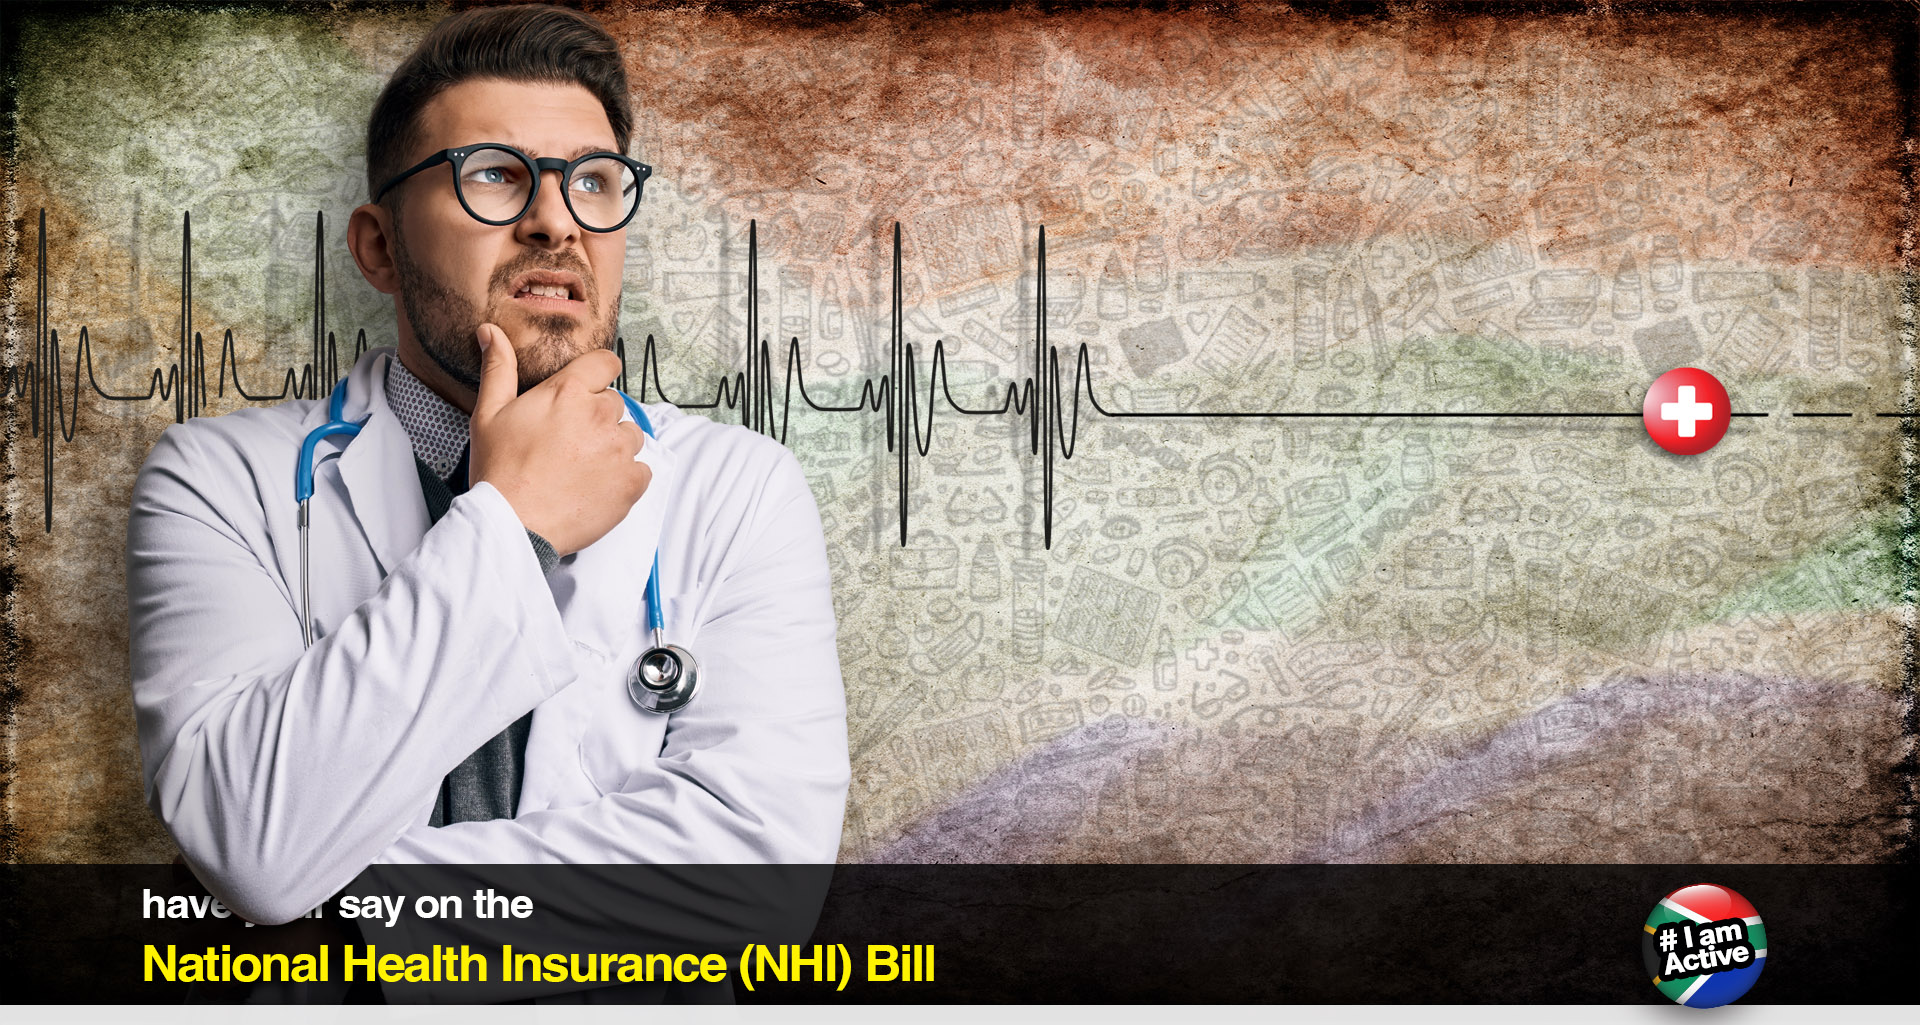 Have your say on the National Health Insurance (NHI) Bill